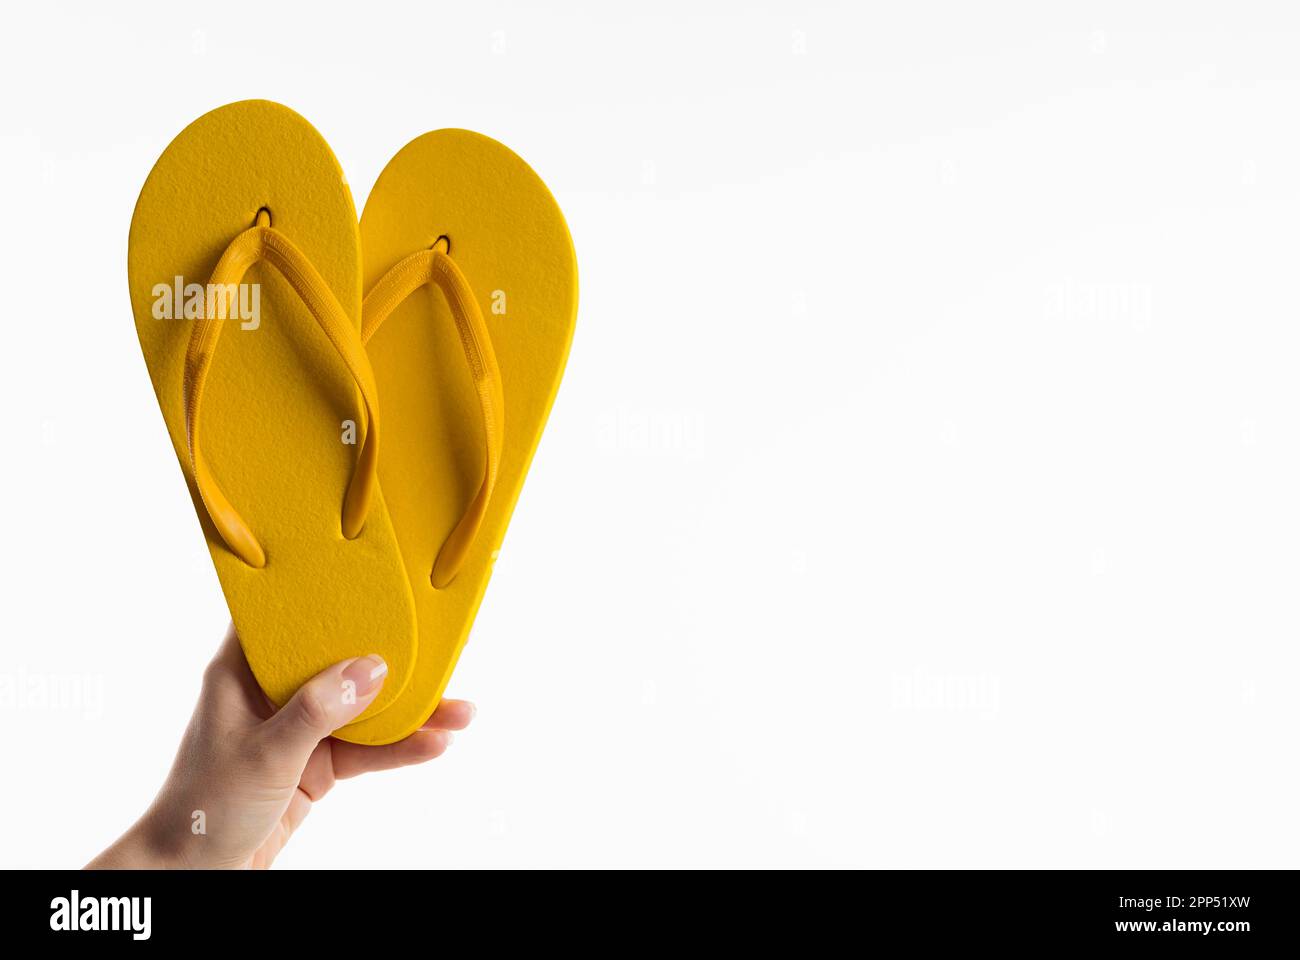 Front view hand holding flip flops Stock Photo